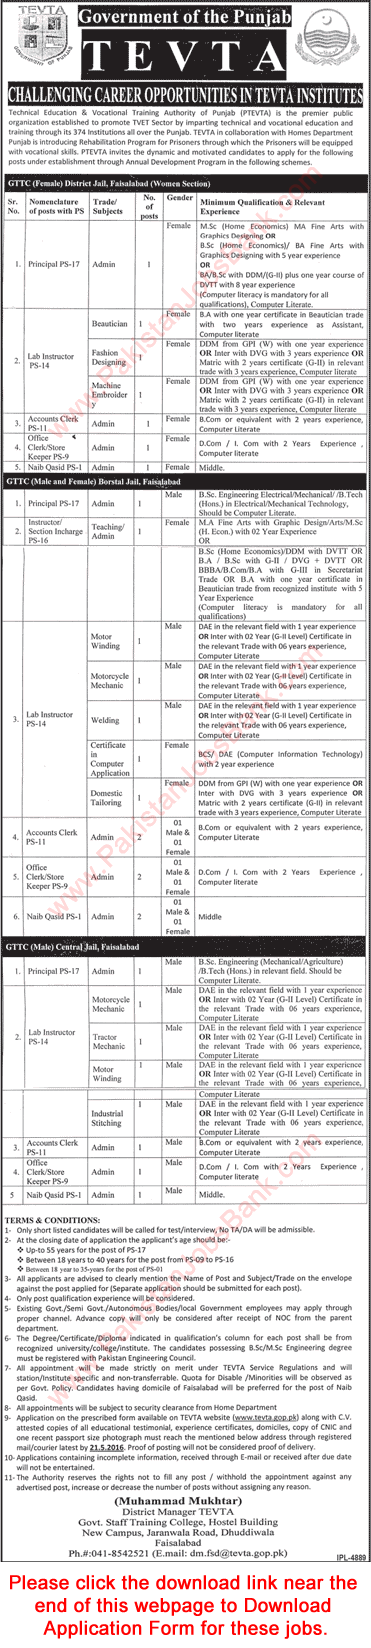 TEVTA Jobs May 2016 Faisalabad Government Technical Training Centers in Jails Application Form Latest